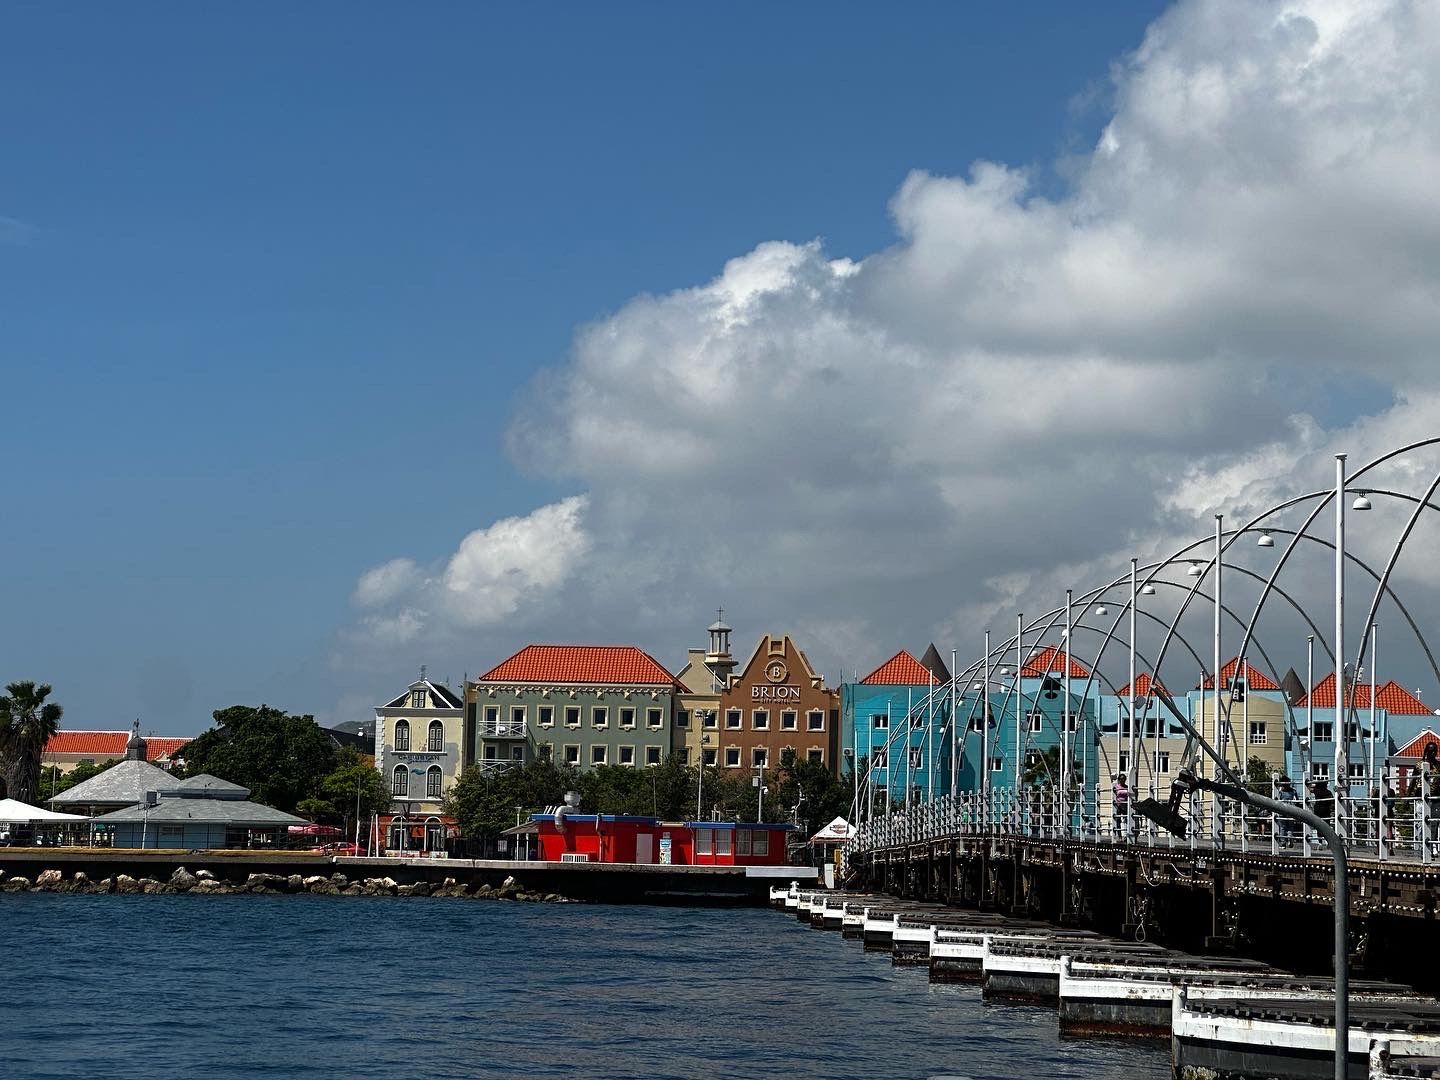 The Wonders of the Caribbean: Things to do in Curacao